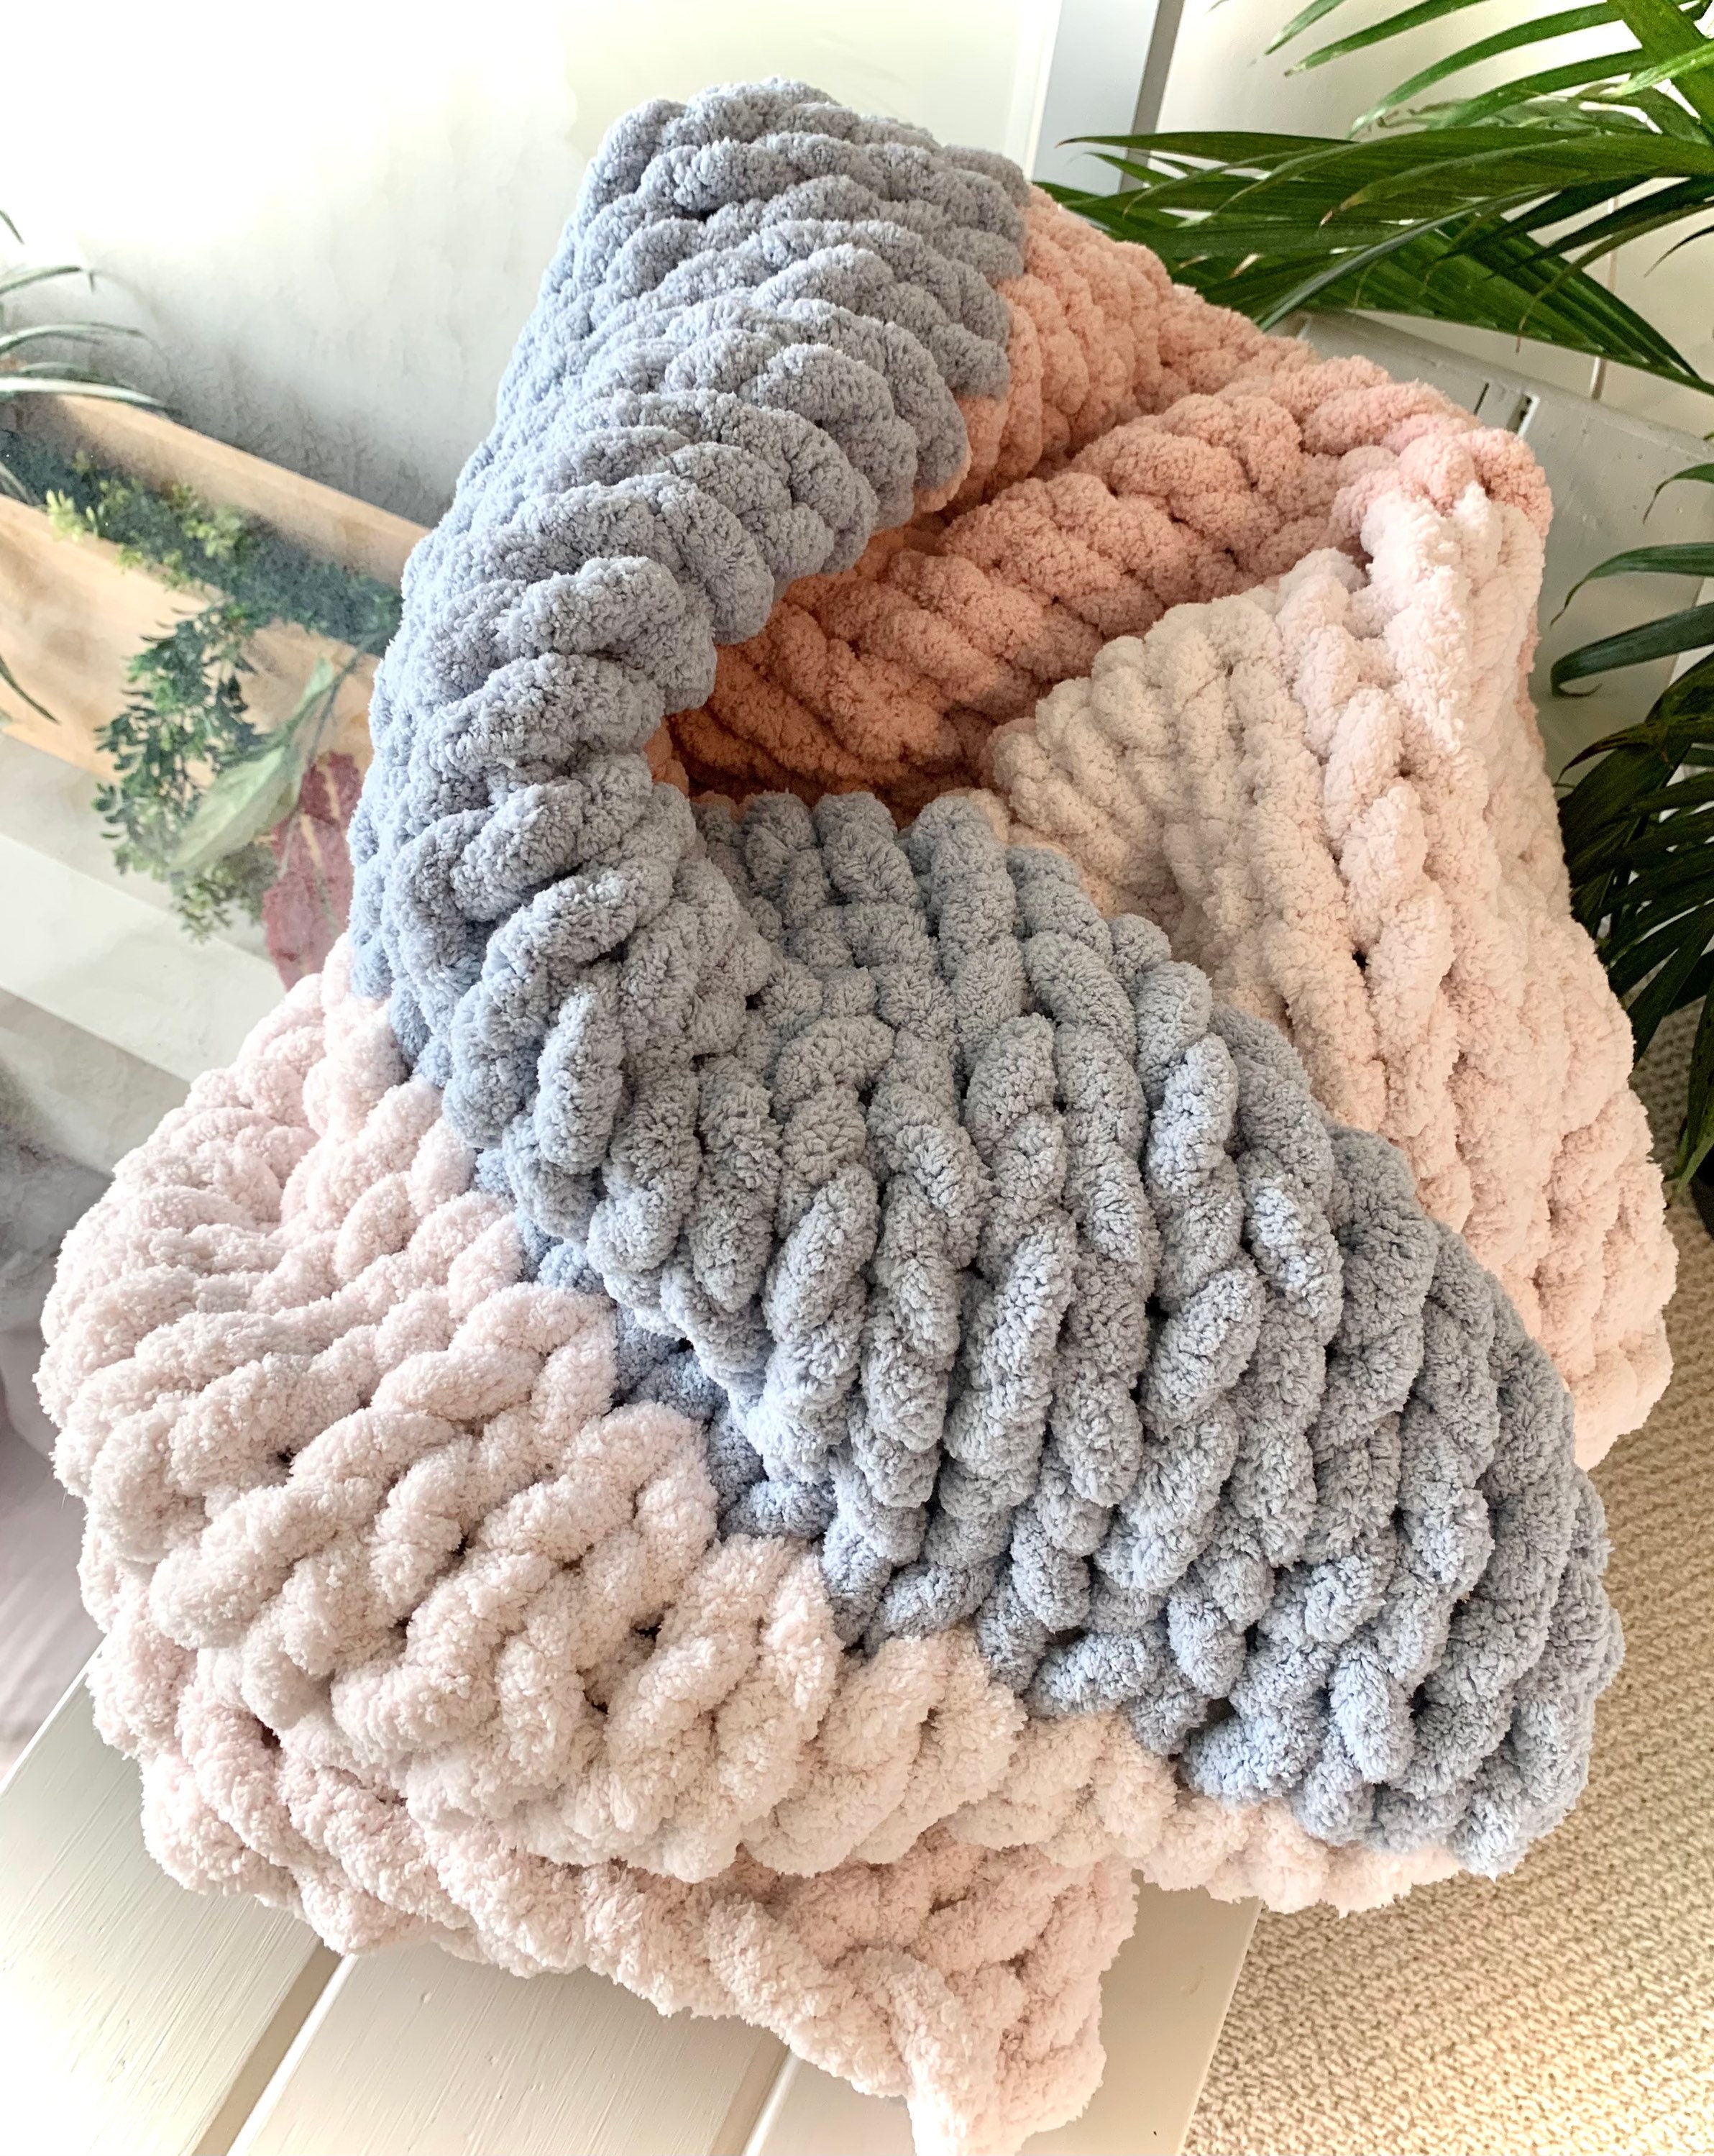 Bed Throws,Knitted Weighted Blanket,Chunky Knit Blanket,Yarn Filling-Hand  Woven Knotted Blankets for Bed Sofa Chair, Chunky Yarn Blanket for Home